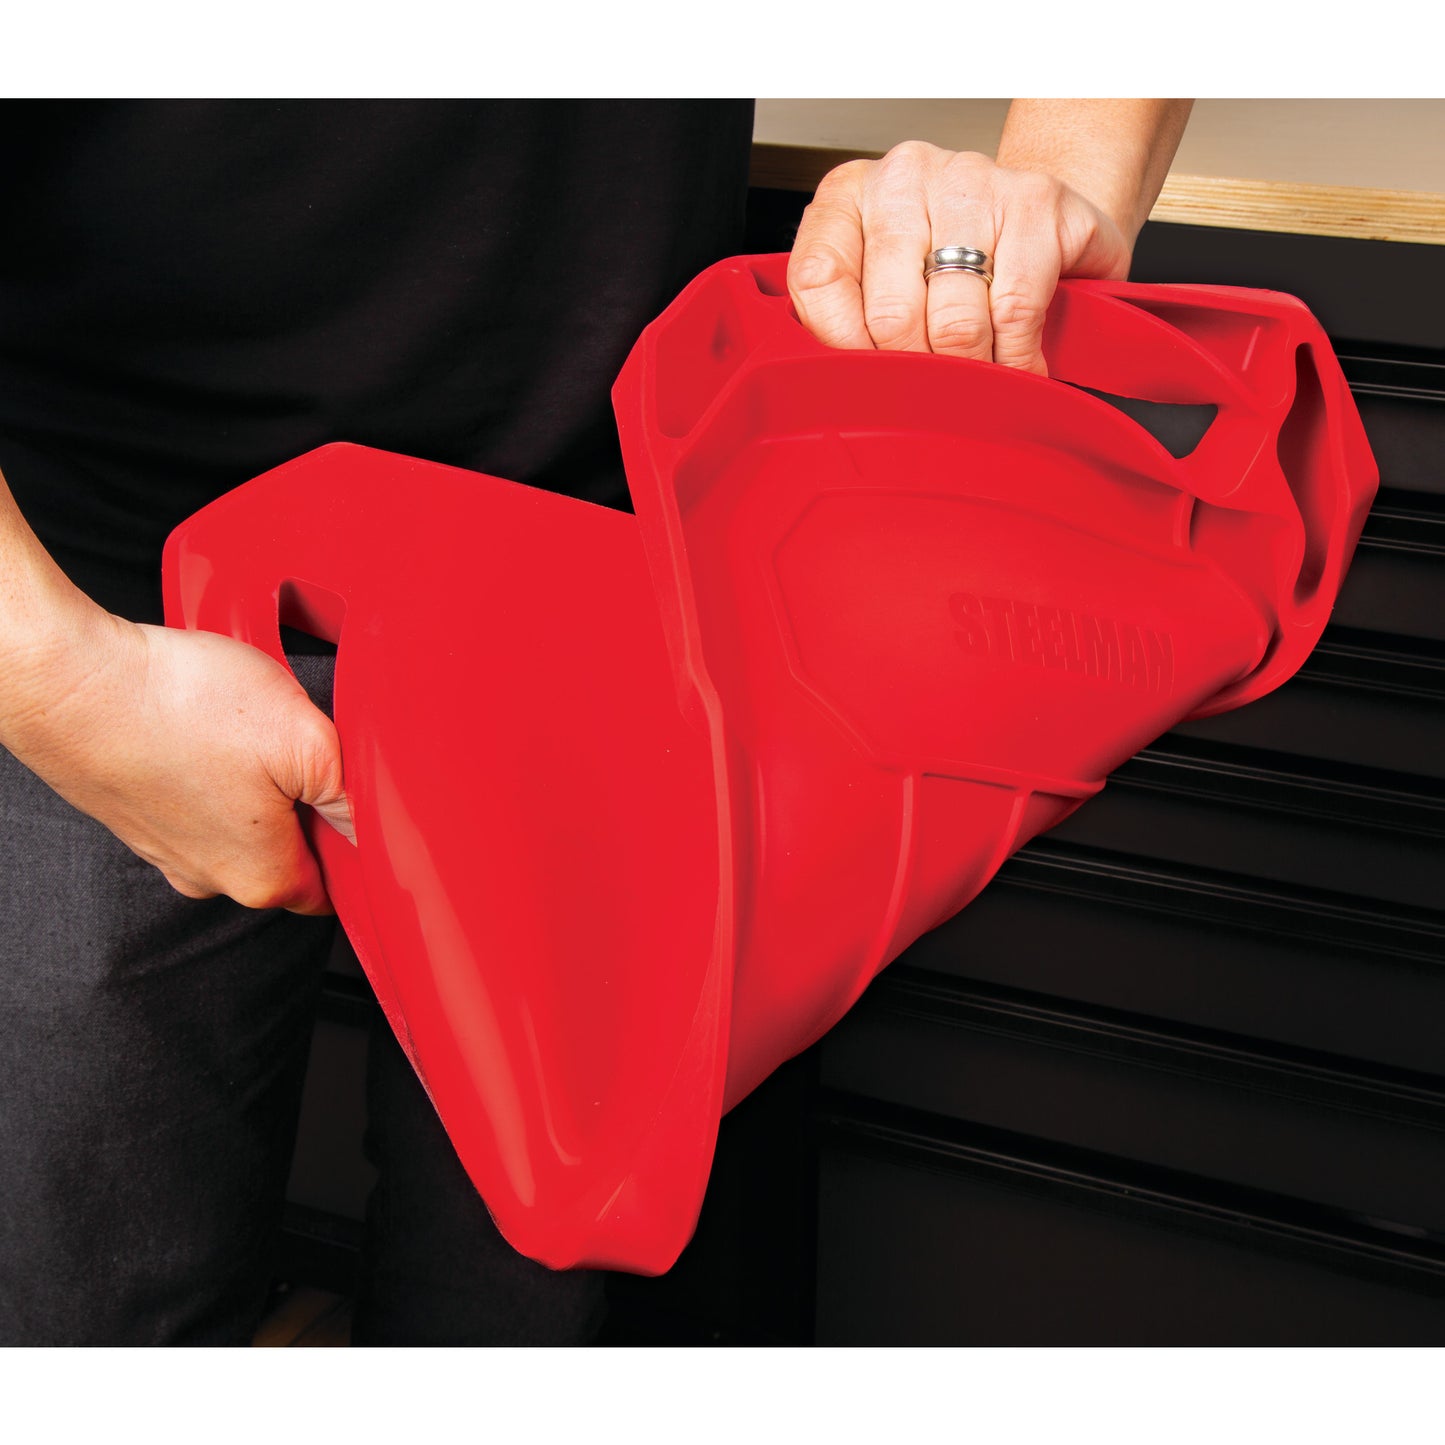 Large 21.8 x 11.8-inch Silicone Tool and Hobby Tray